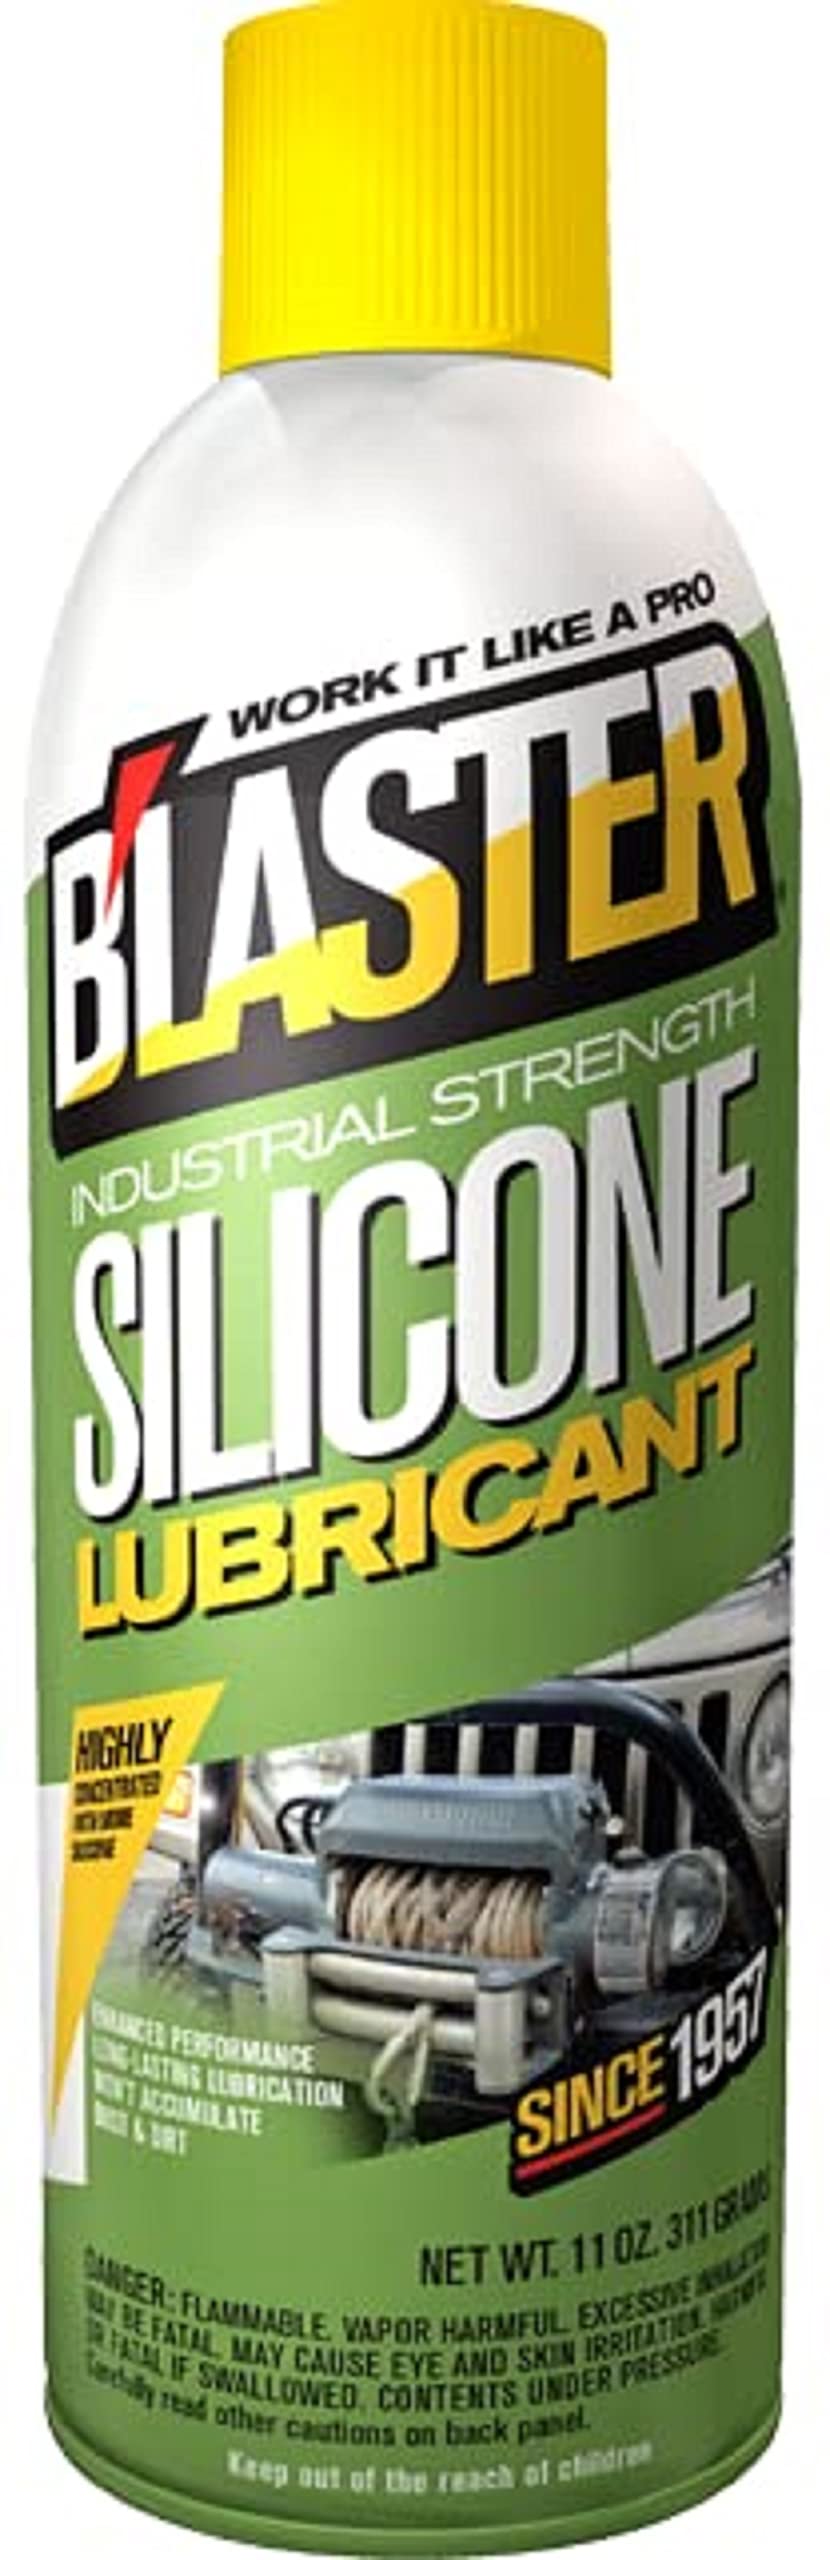 B'laster 16-SL Industrial Strength Silicone Lubricant